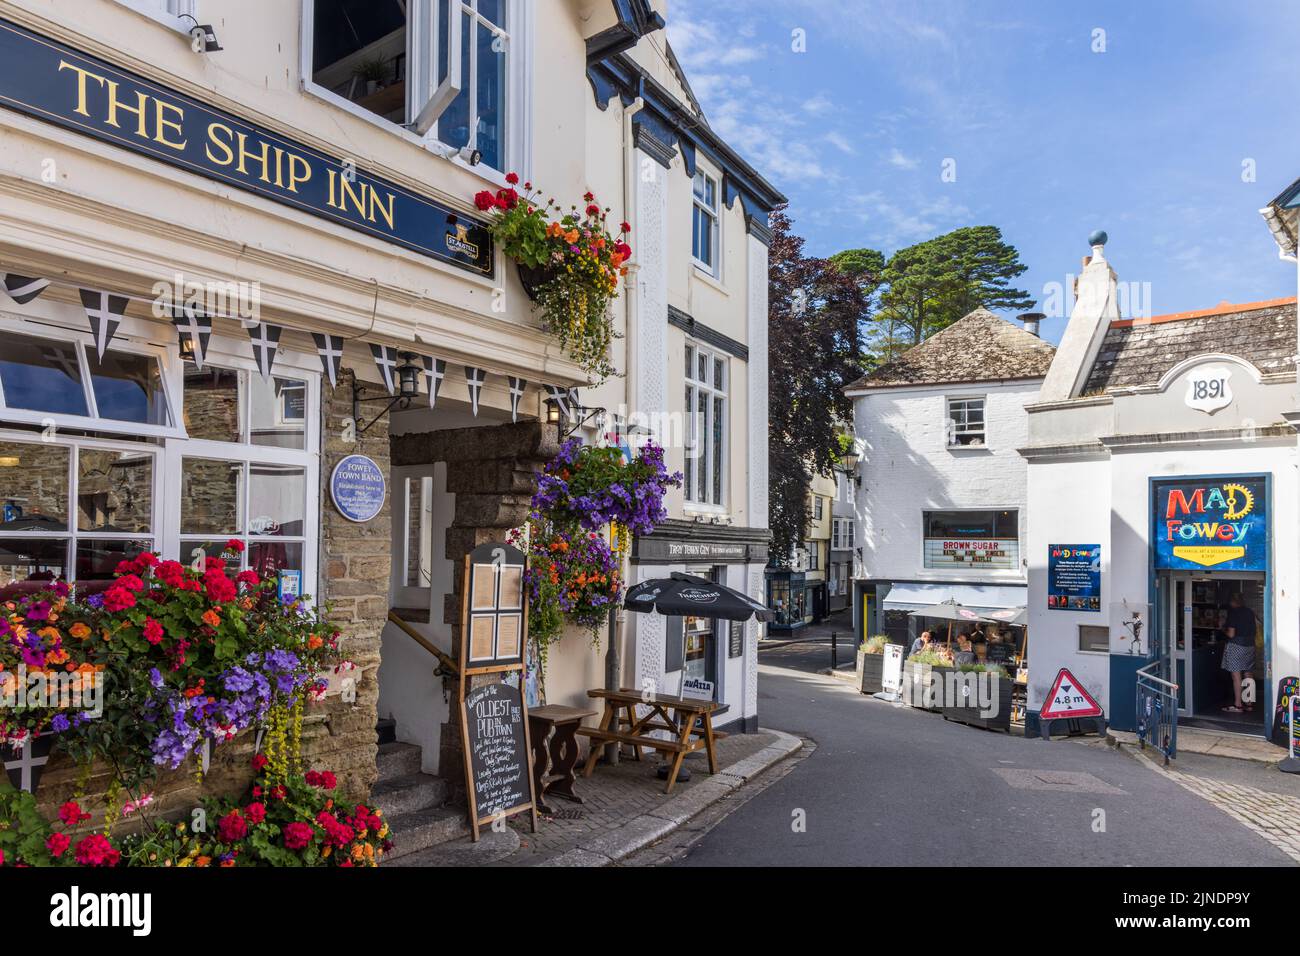 A street scene with colourful floral displays outside the 16th century Ship Inn, a historic pub in Fowey, Cornwall. Stock Photo